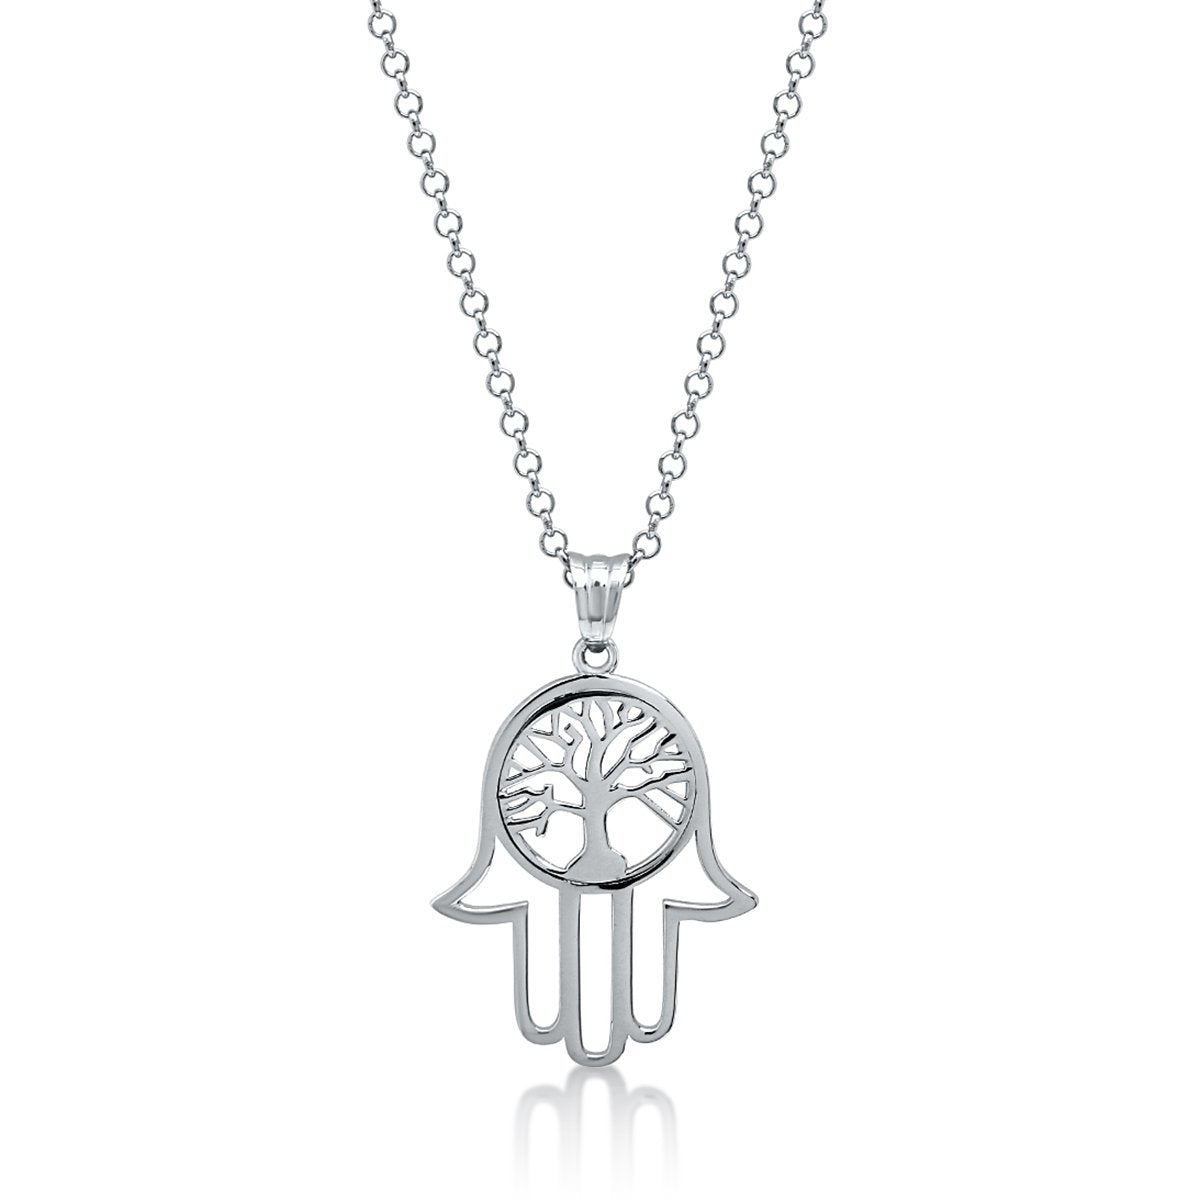 HAMSA NECKLACE WITH TREE OF LIFE